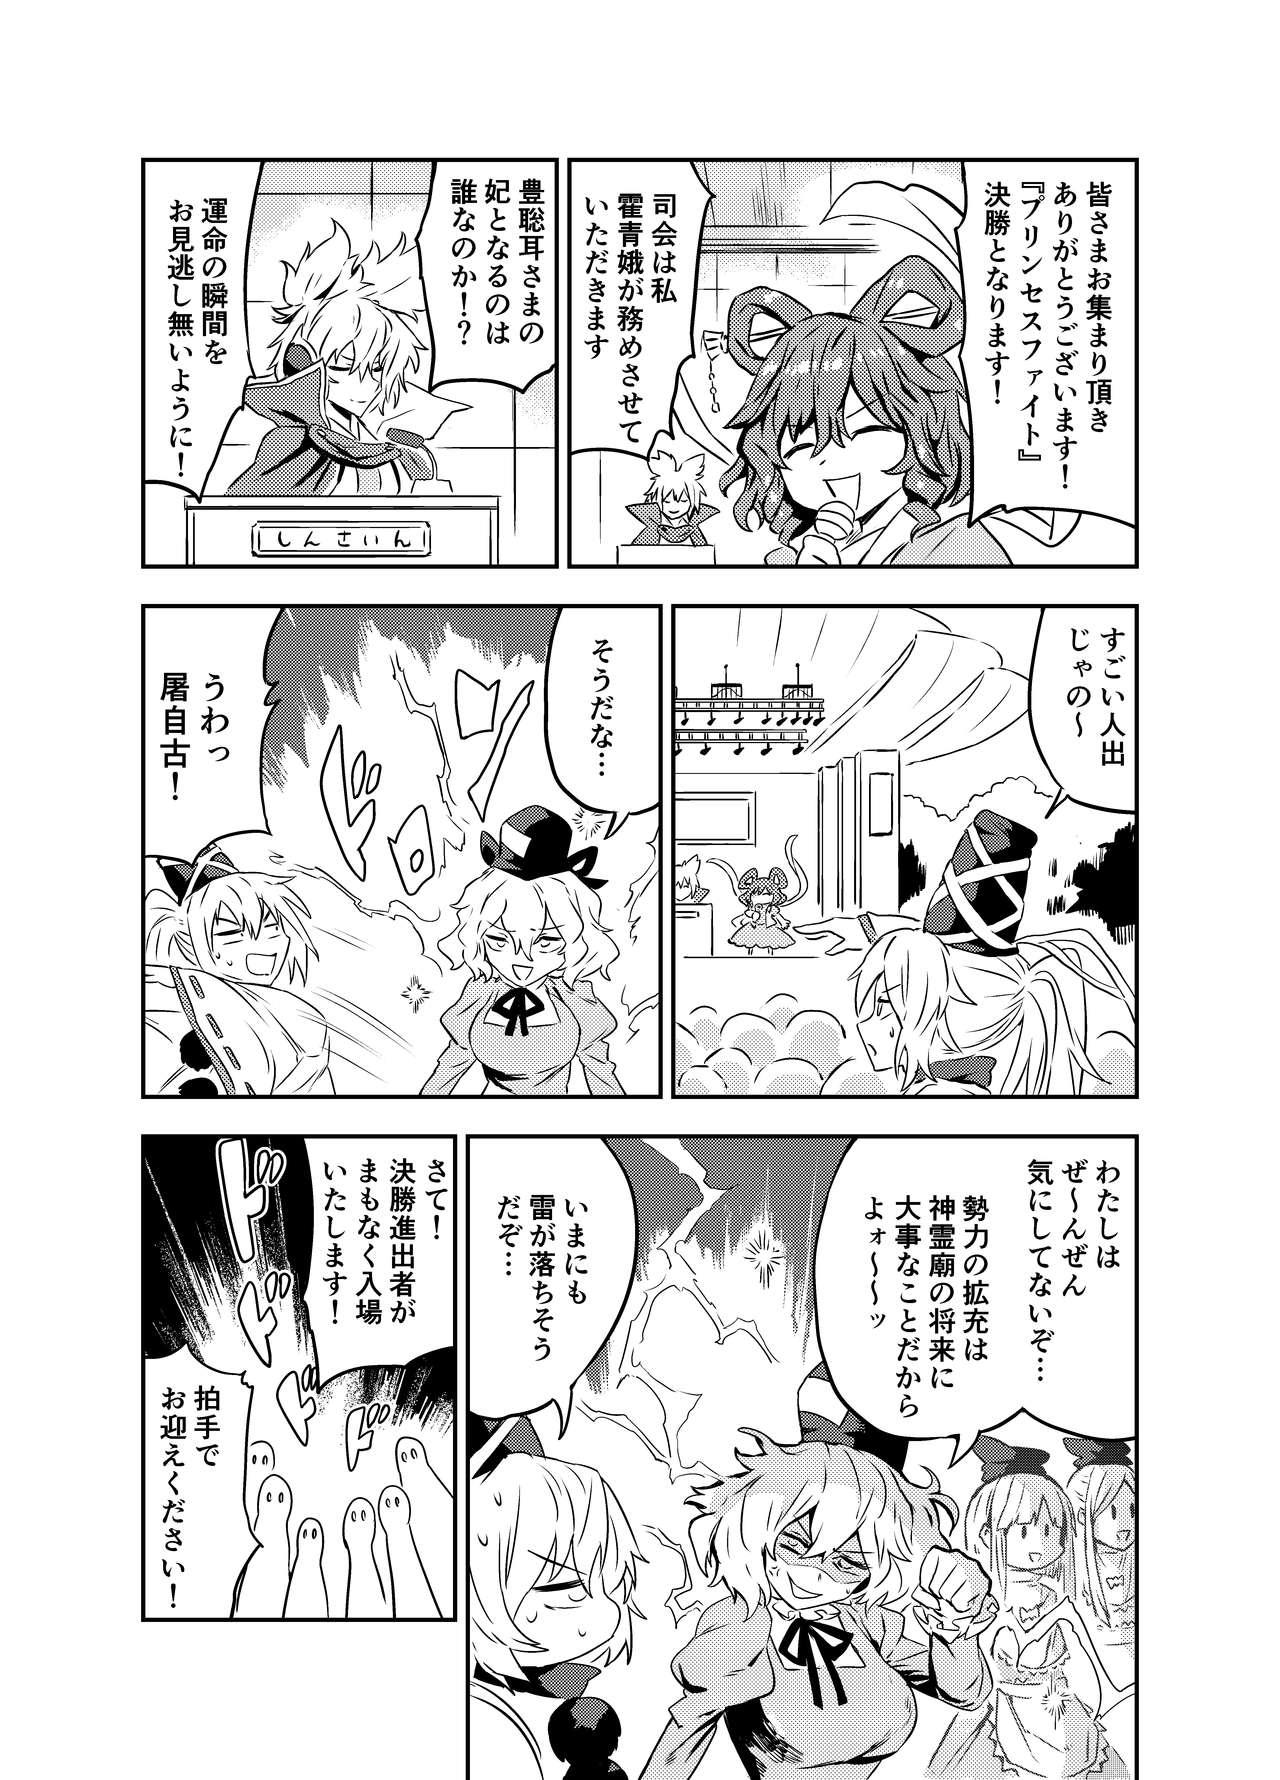 Jacking Off Princess Fight - Touhou project Chile - Page 4